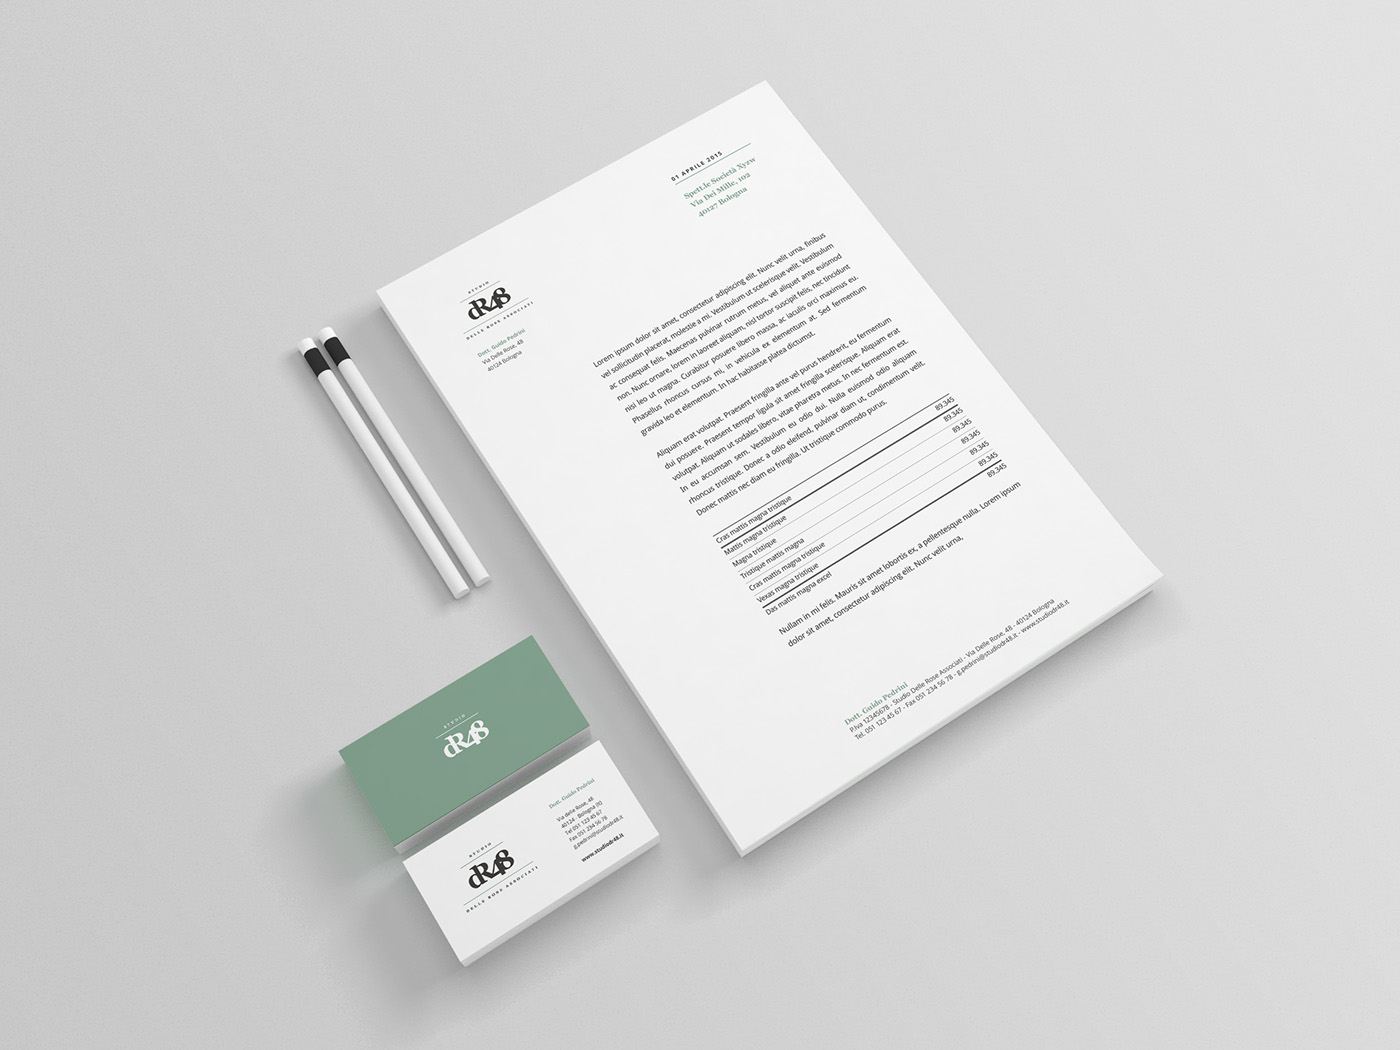 brand accountants firm Stationery photos ArtDirection graphic